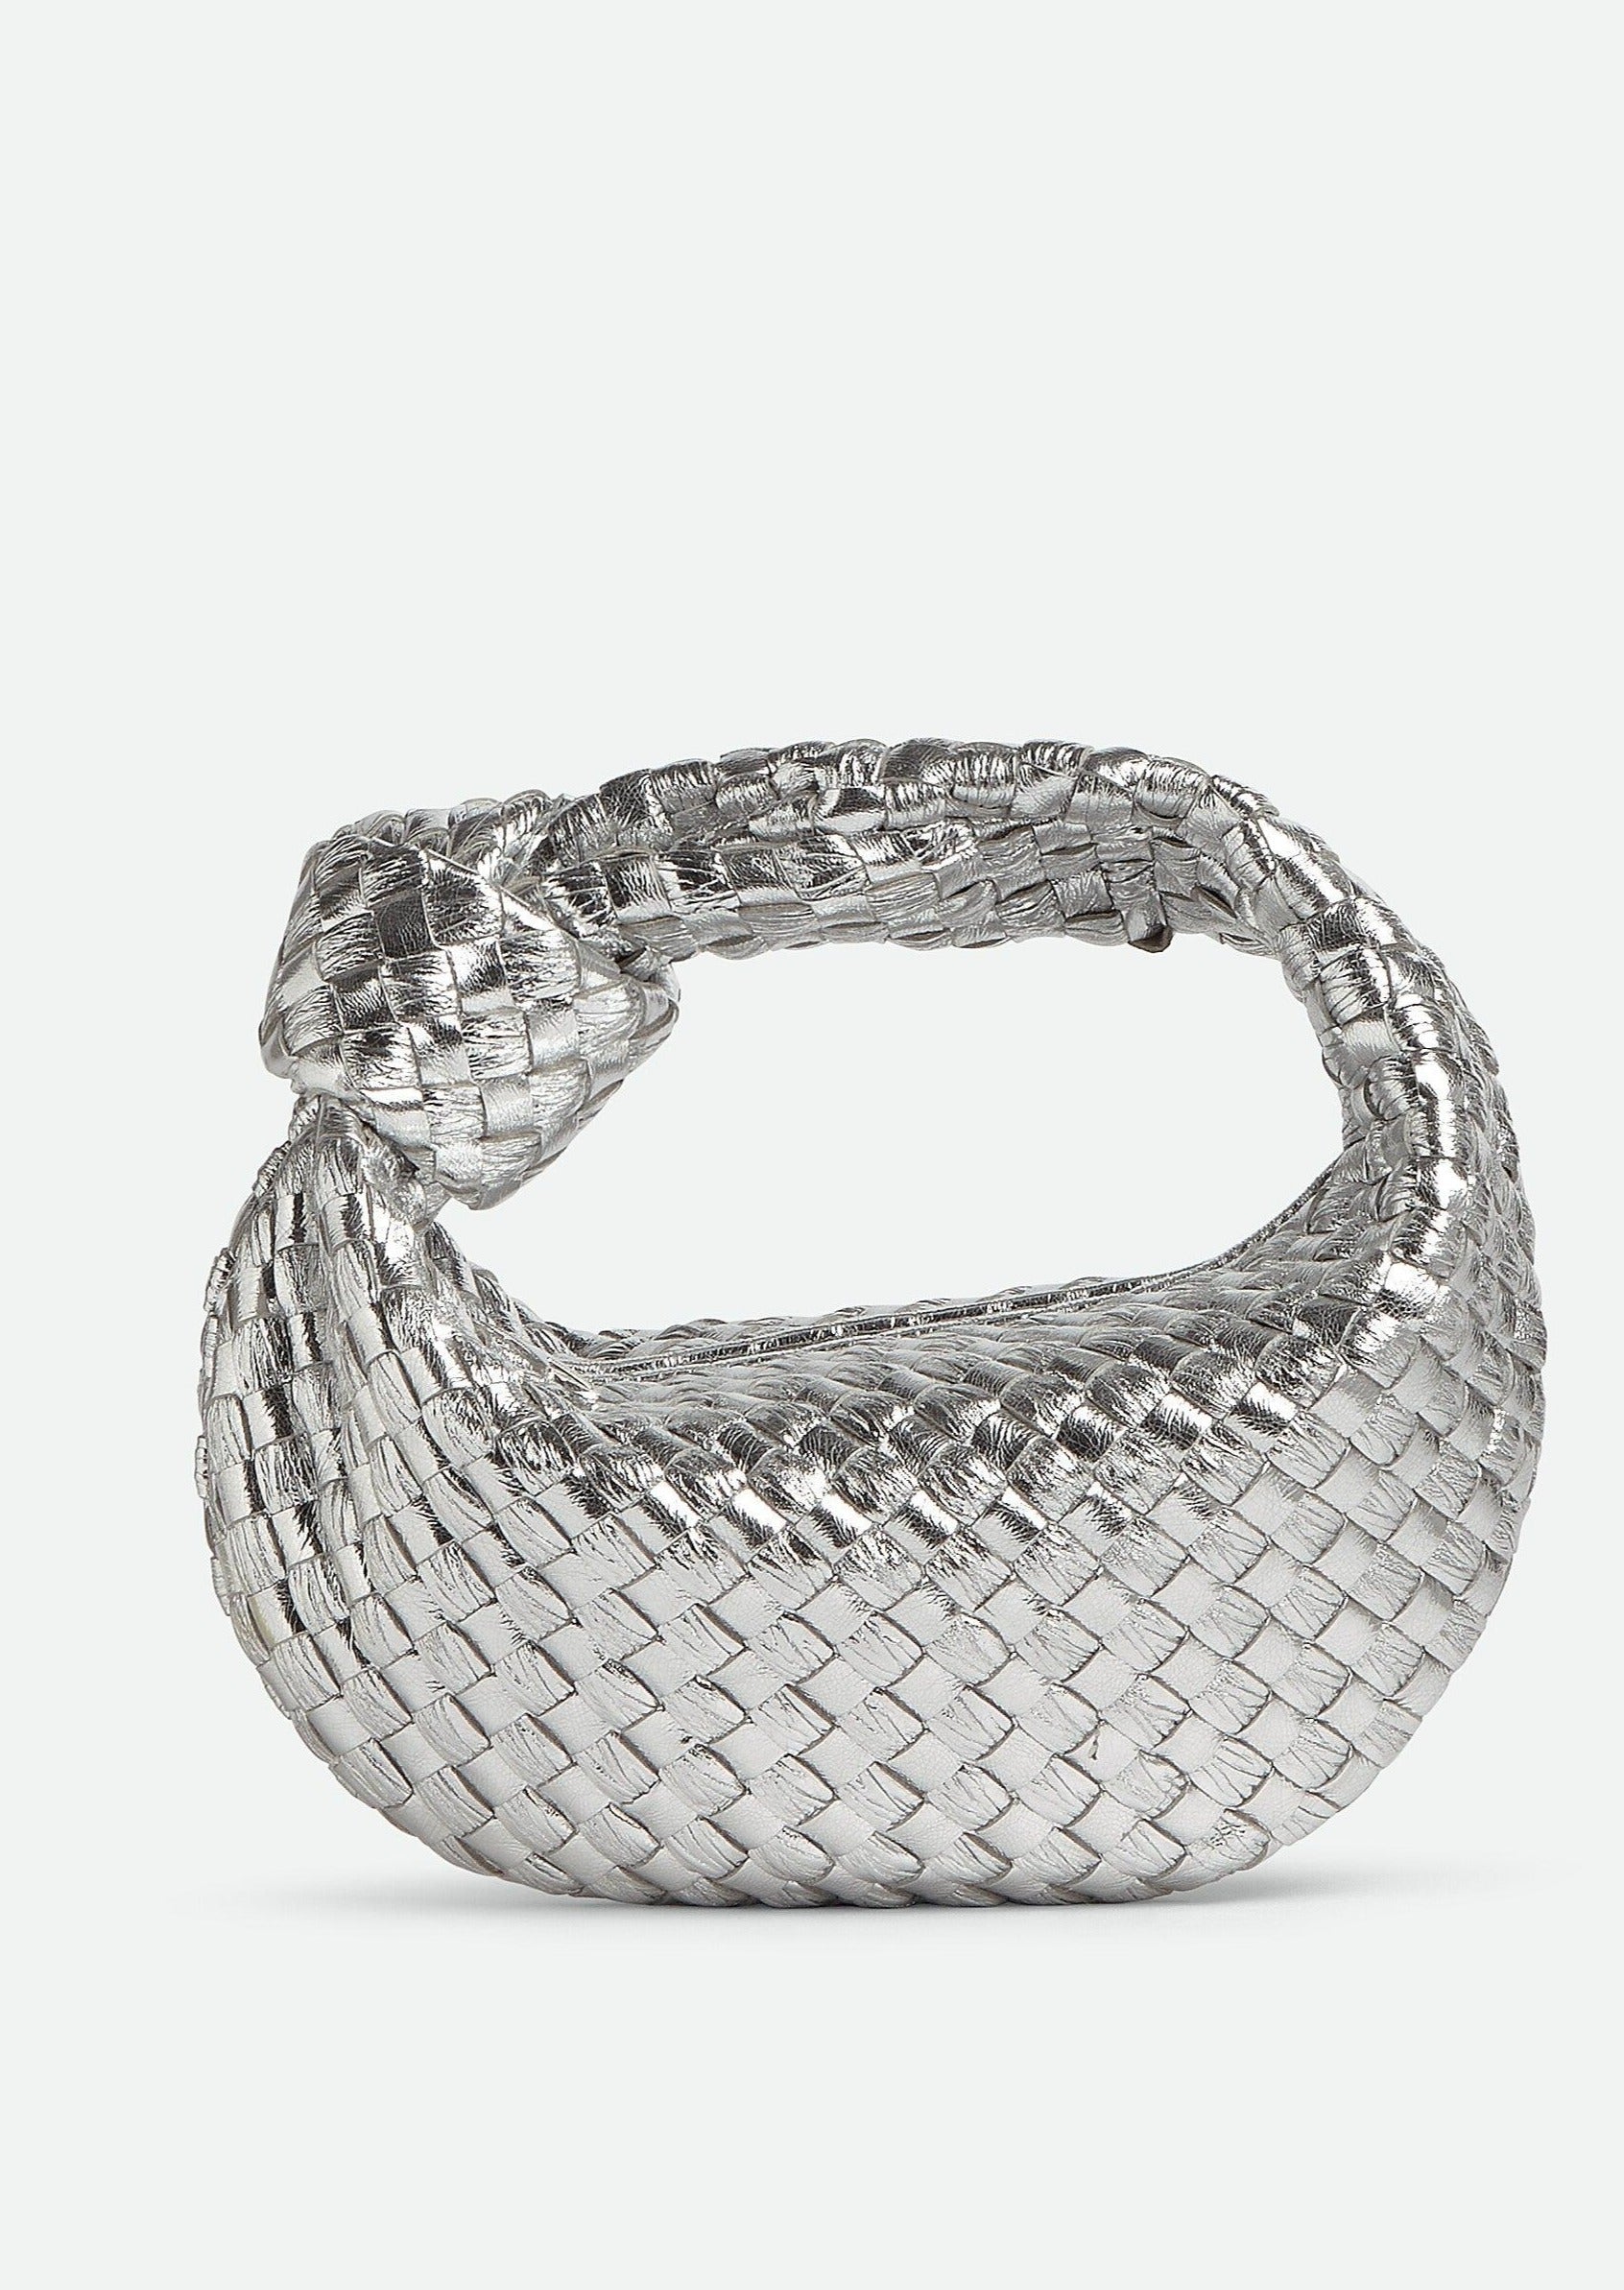 OutDazl - Small Woven Knotted Clutch in Metallic Silver - OutDazl